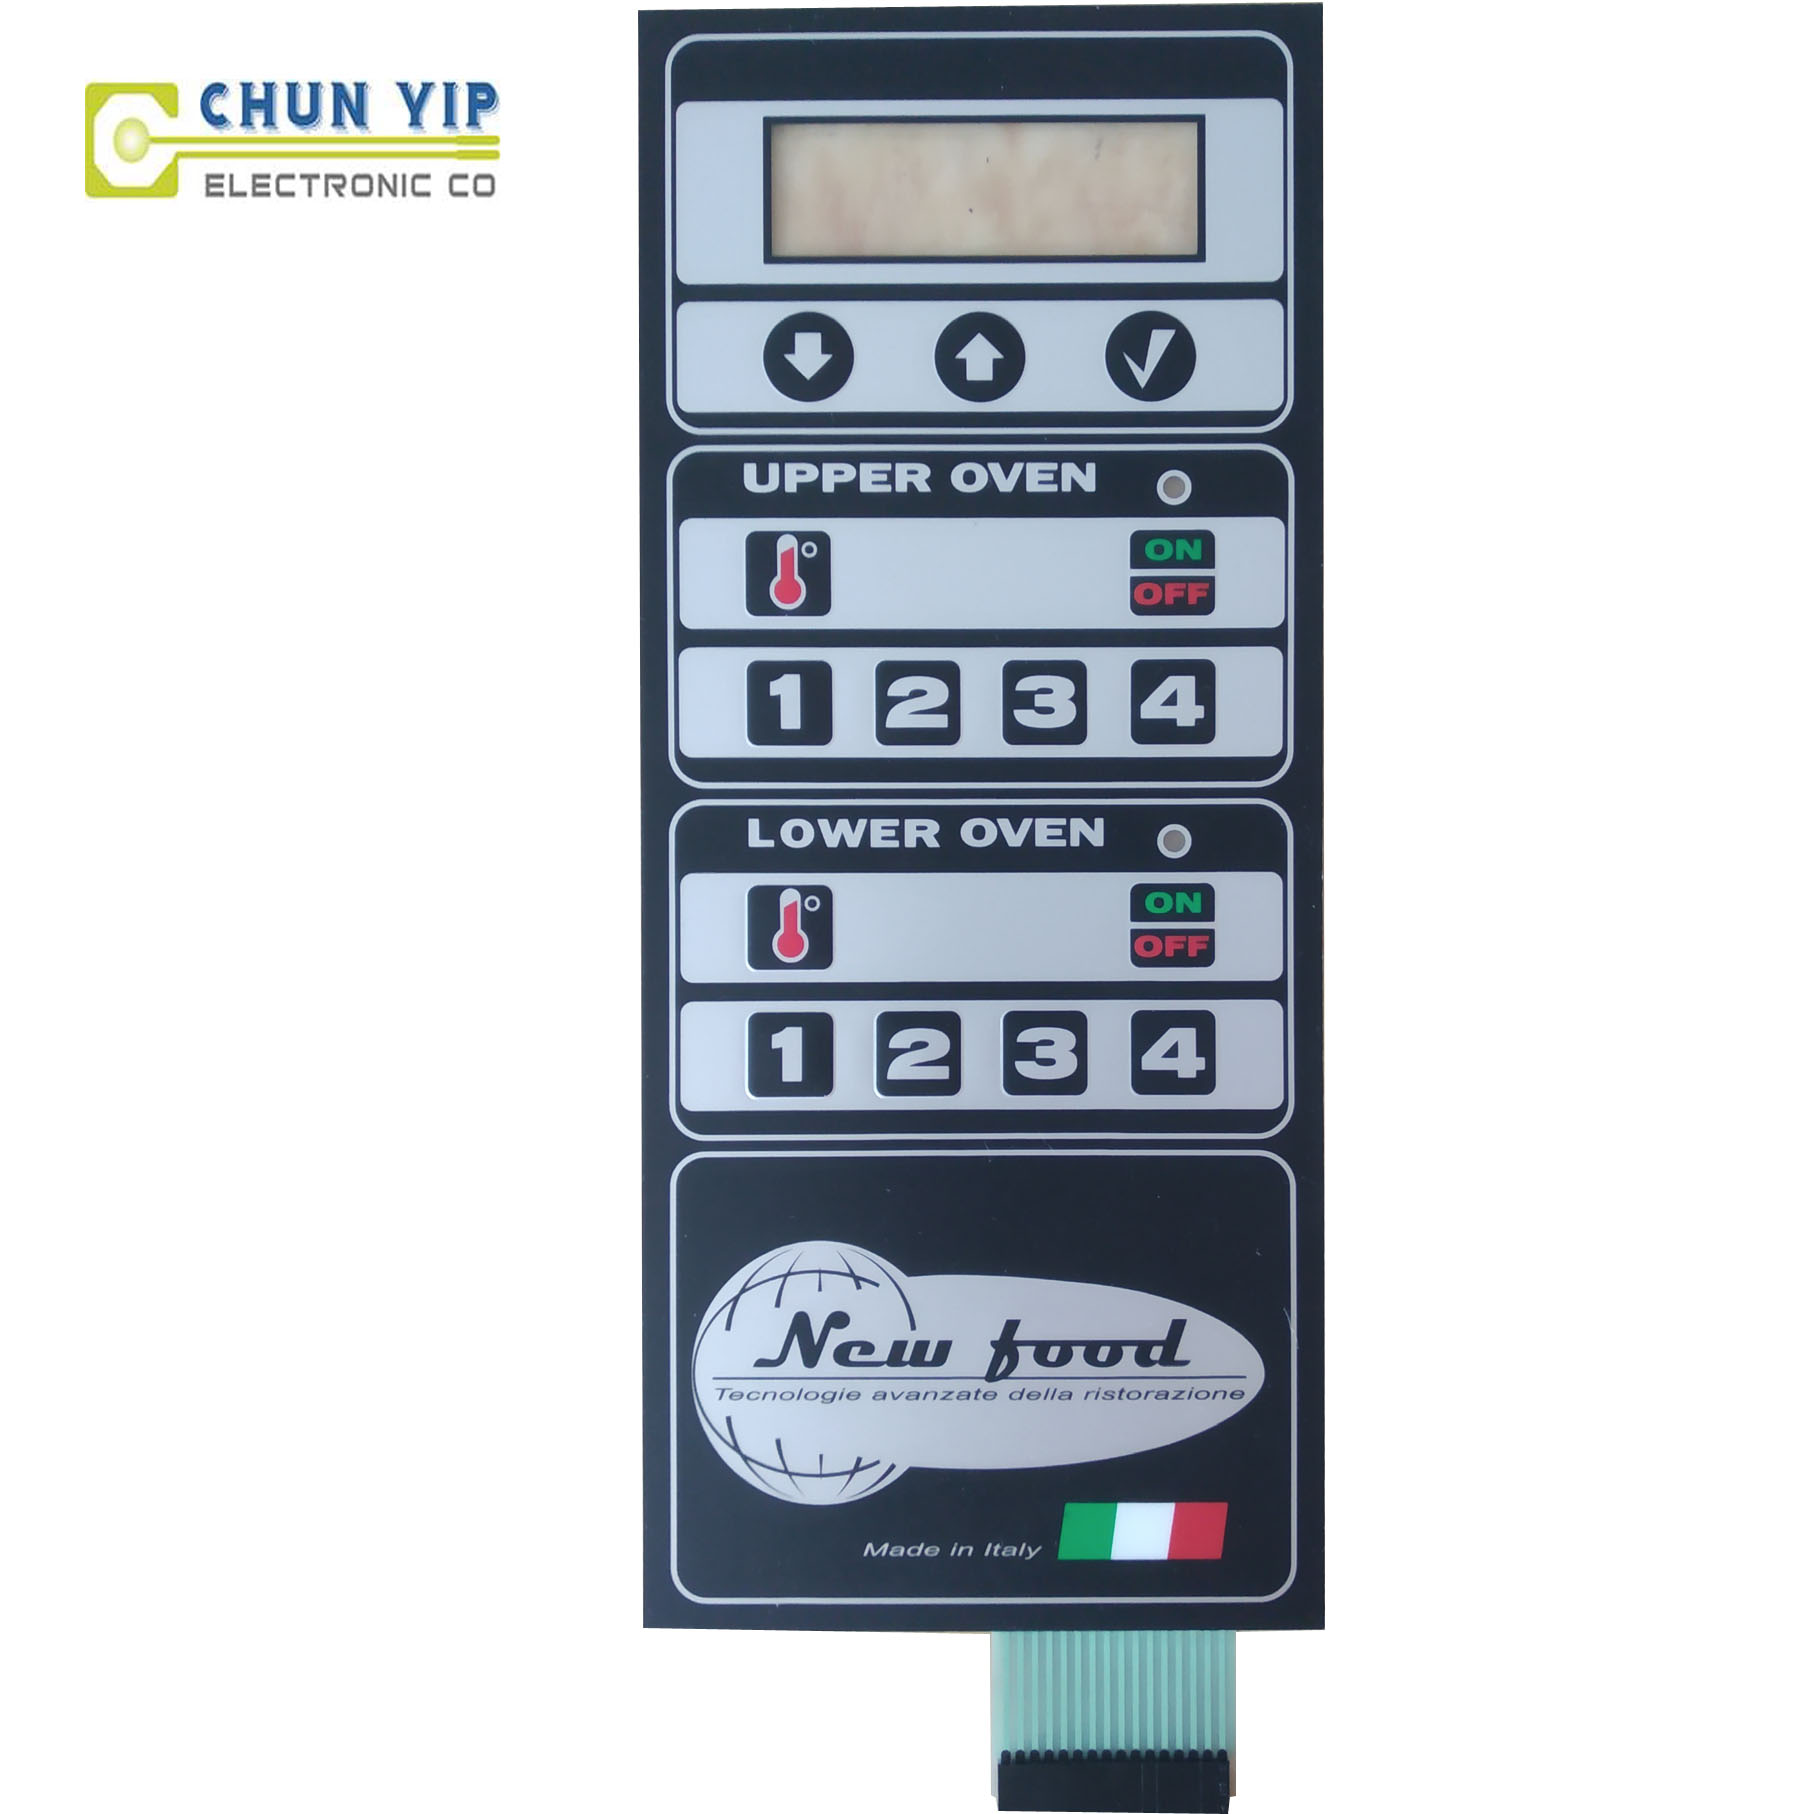 Corrugated Galvanized Steel Membrane Switch With Led -
 Good Wholesale Vendors Hot Sell For Membrane Switch – Chun Yip